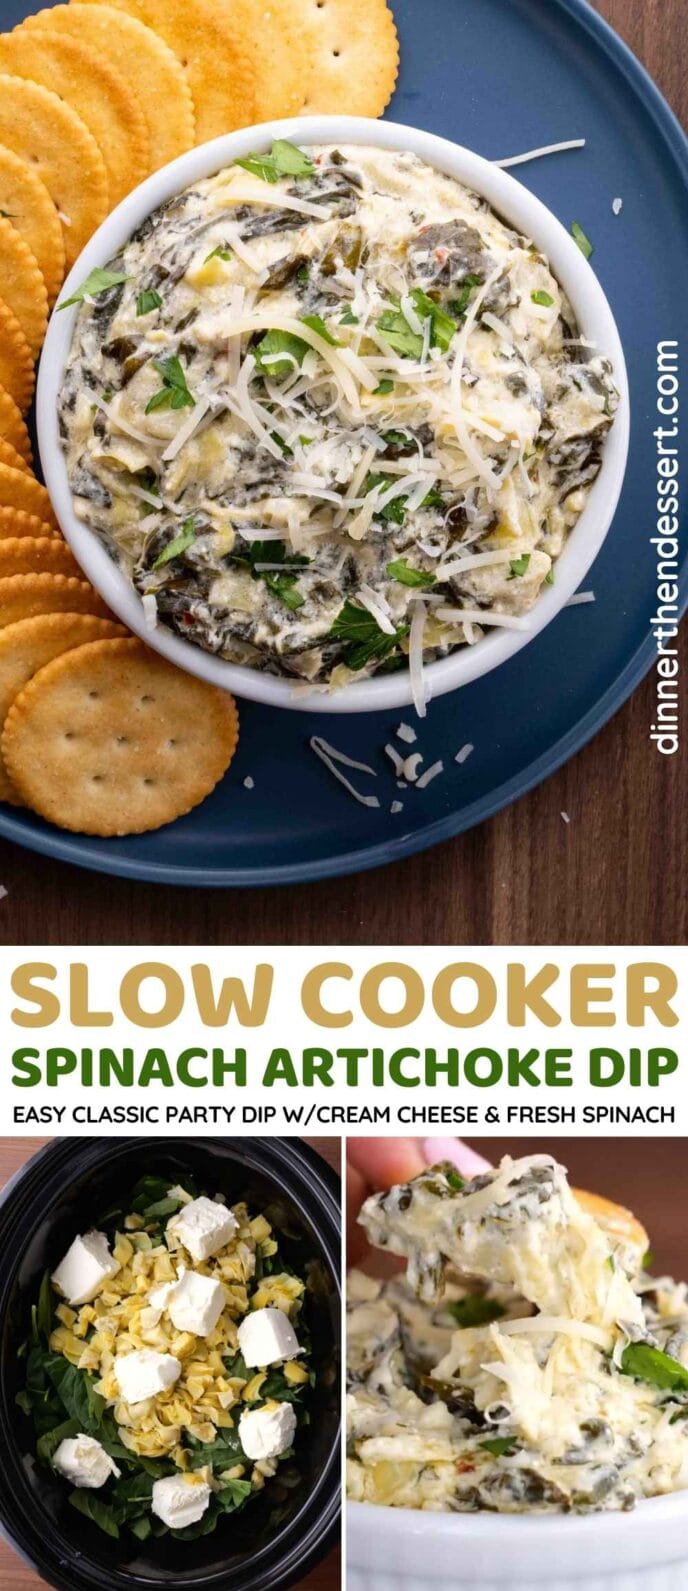 Slow Cooker Spinach Artichoke Dip Collage